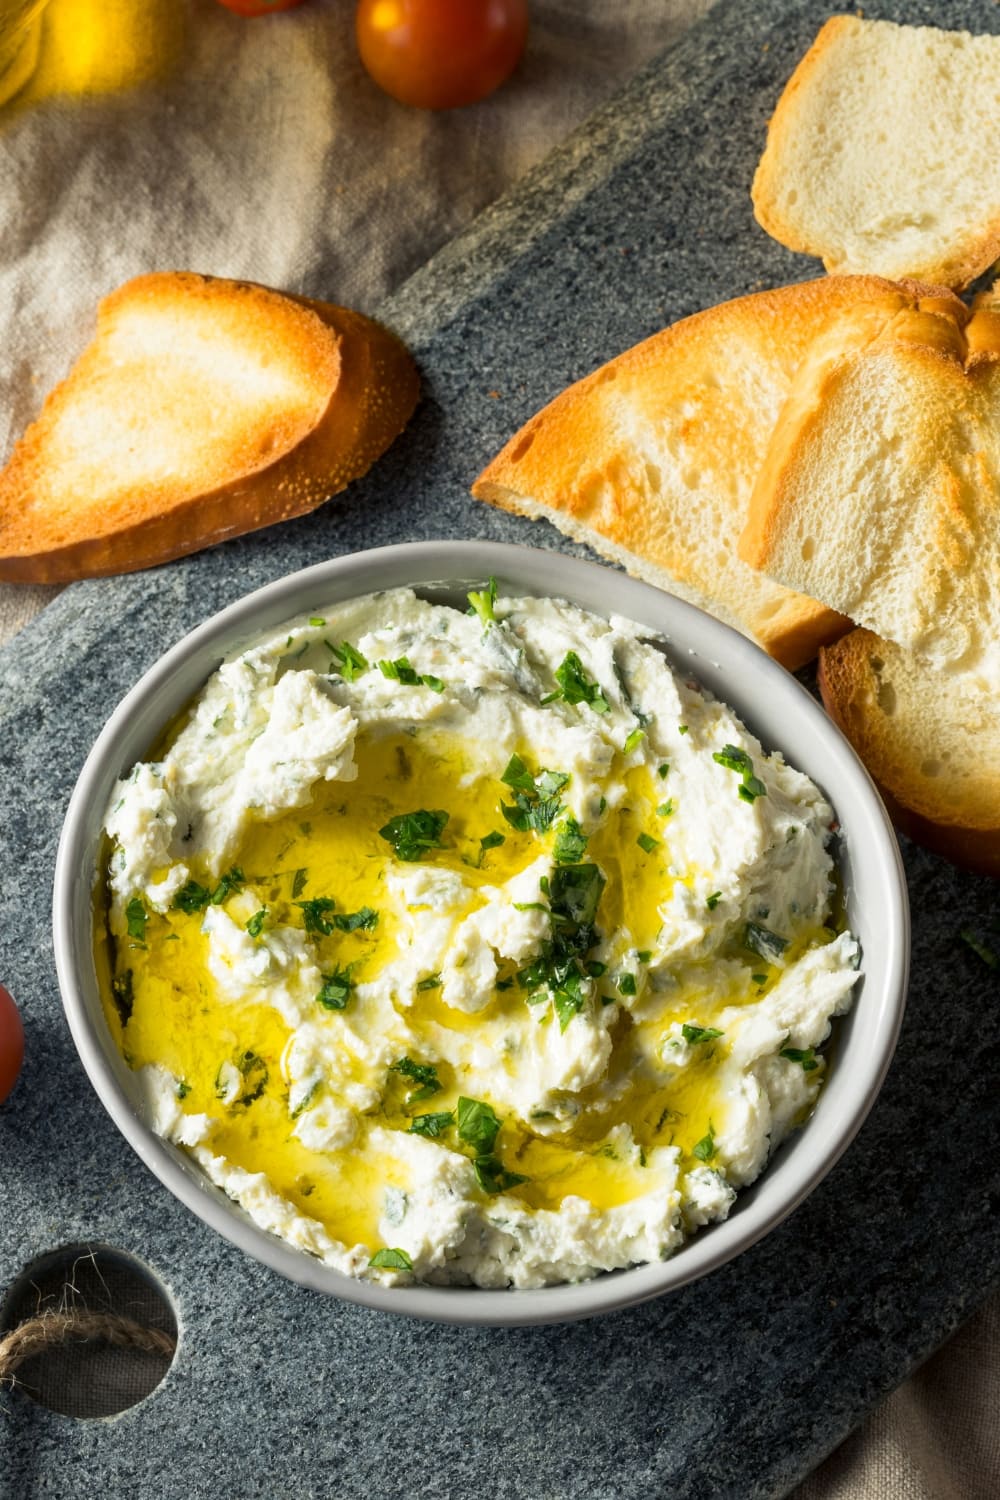 Goat cheese dip with garlic and parsley, served with slices of bread.